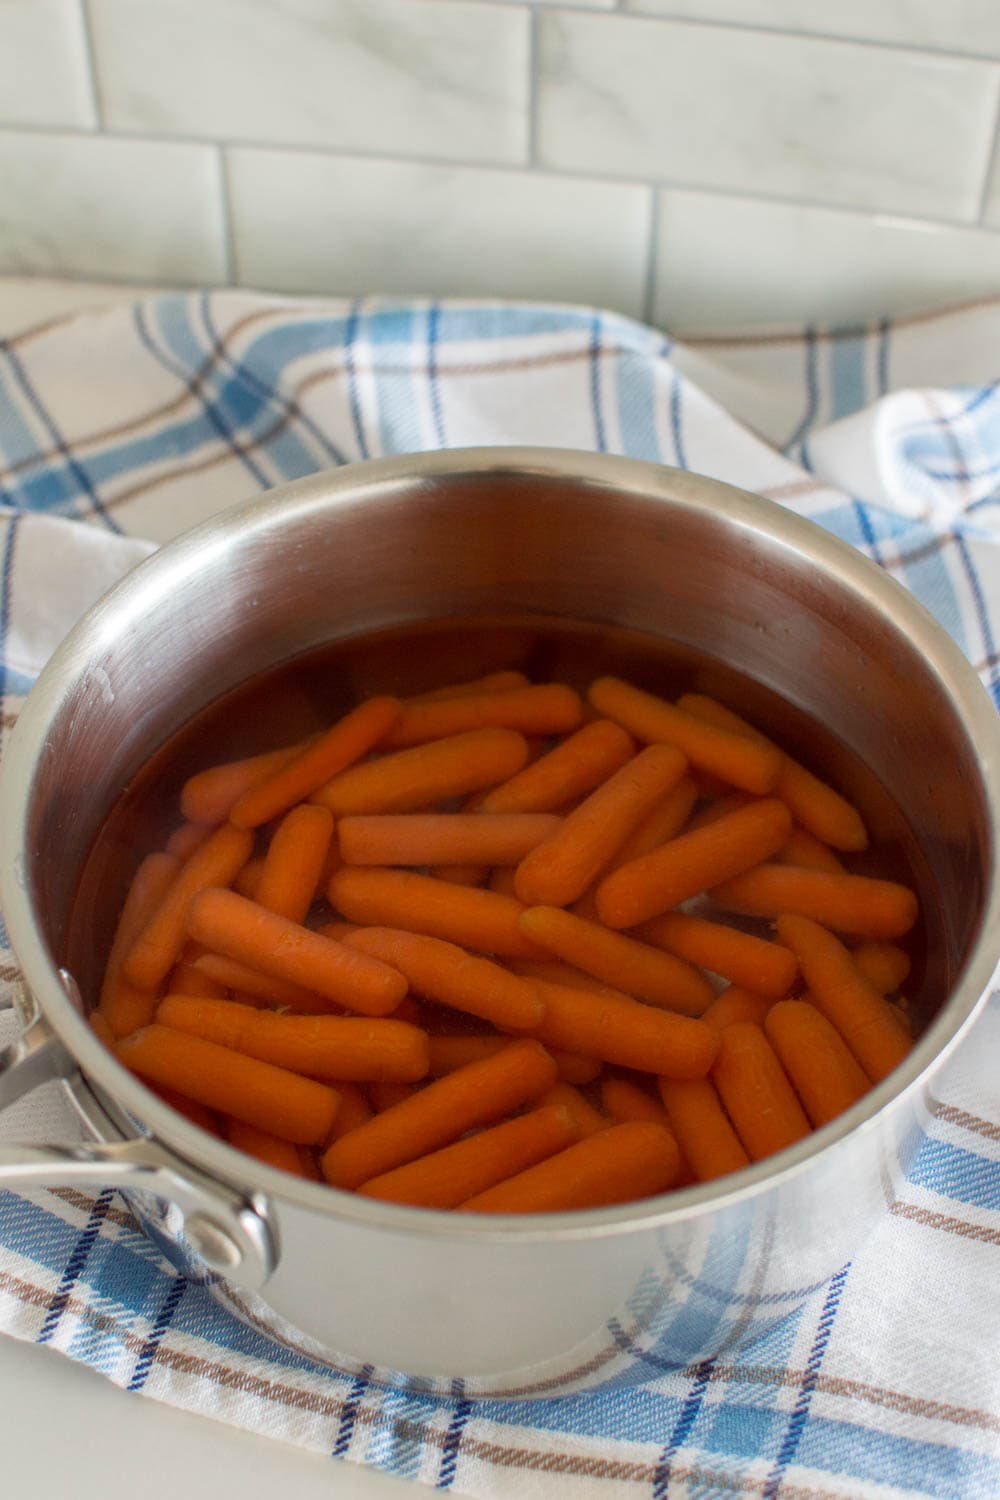 Adding baby carrots into a pot of boiling water